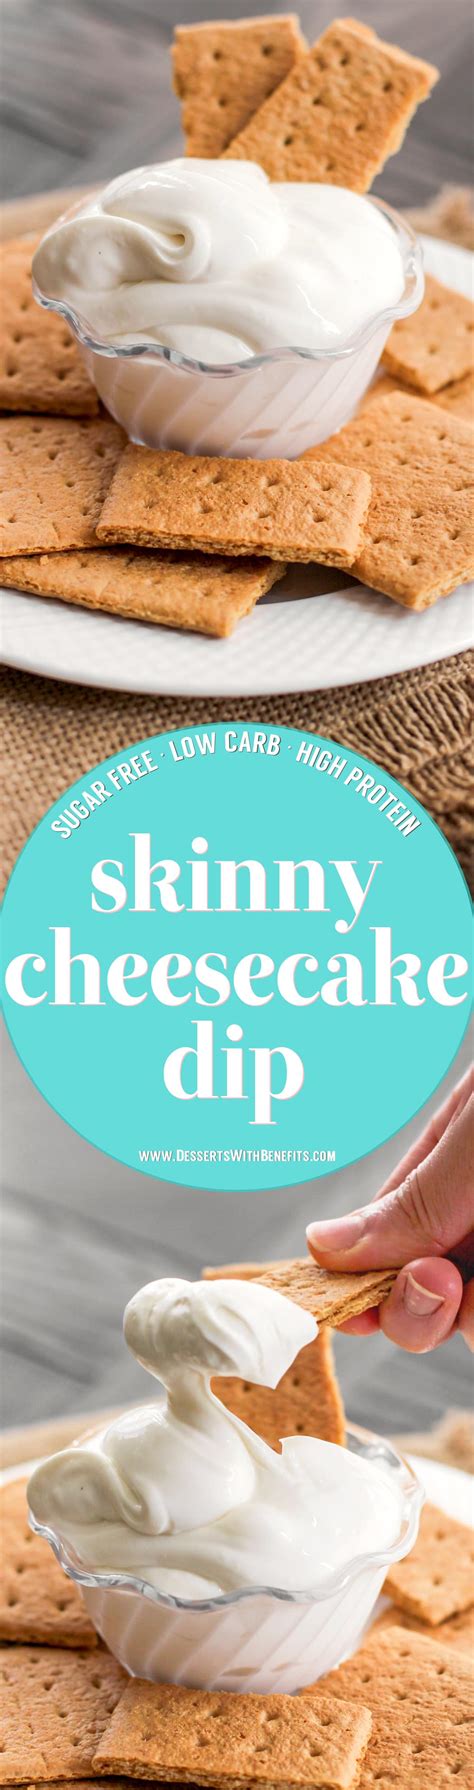 Healthier recipes, from the food and nutrition experts at eatingwell. Healthy Cheesecake Dip (sugar free, low carb, low fat ...